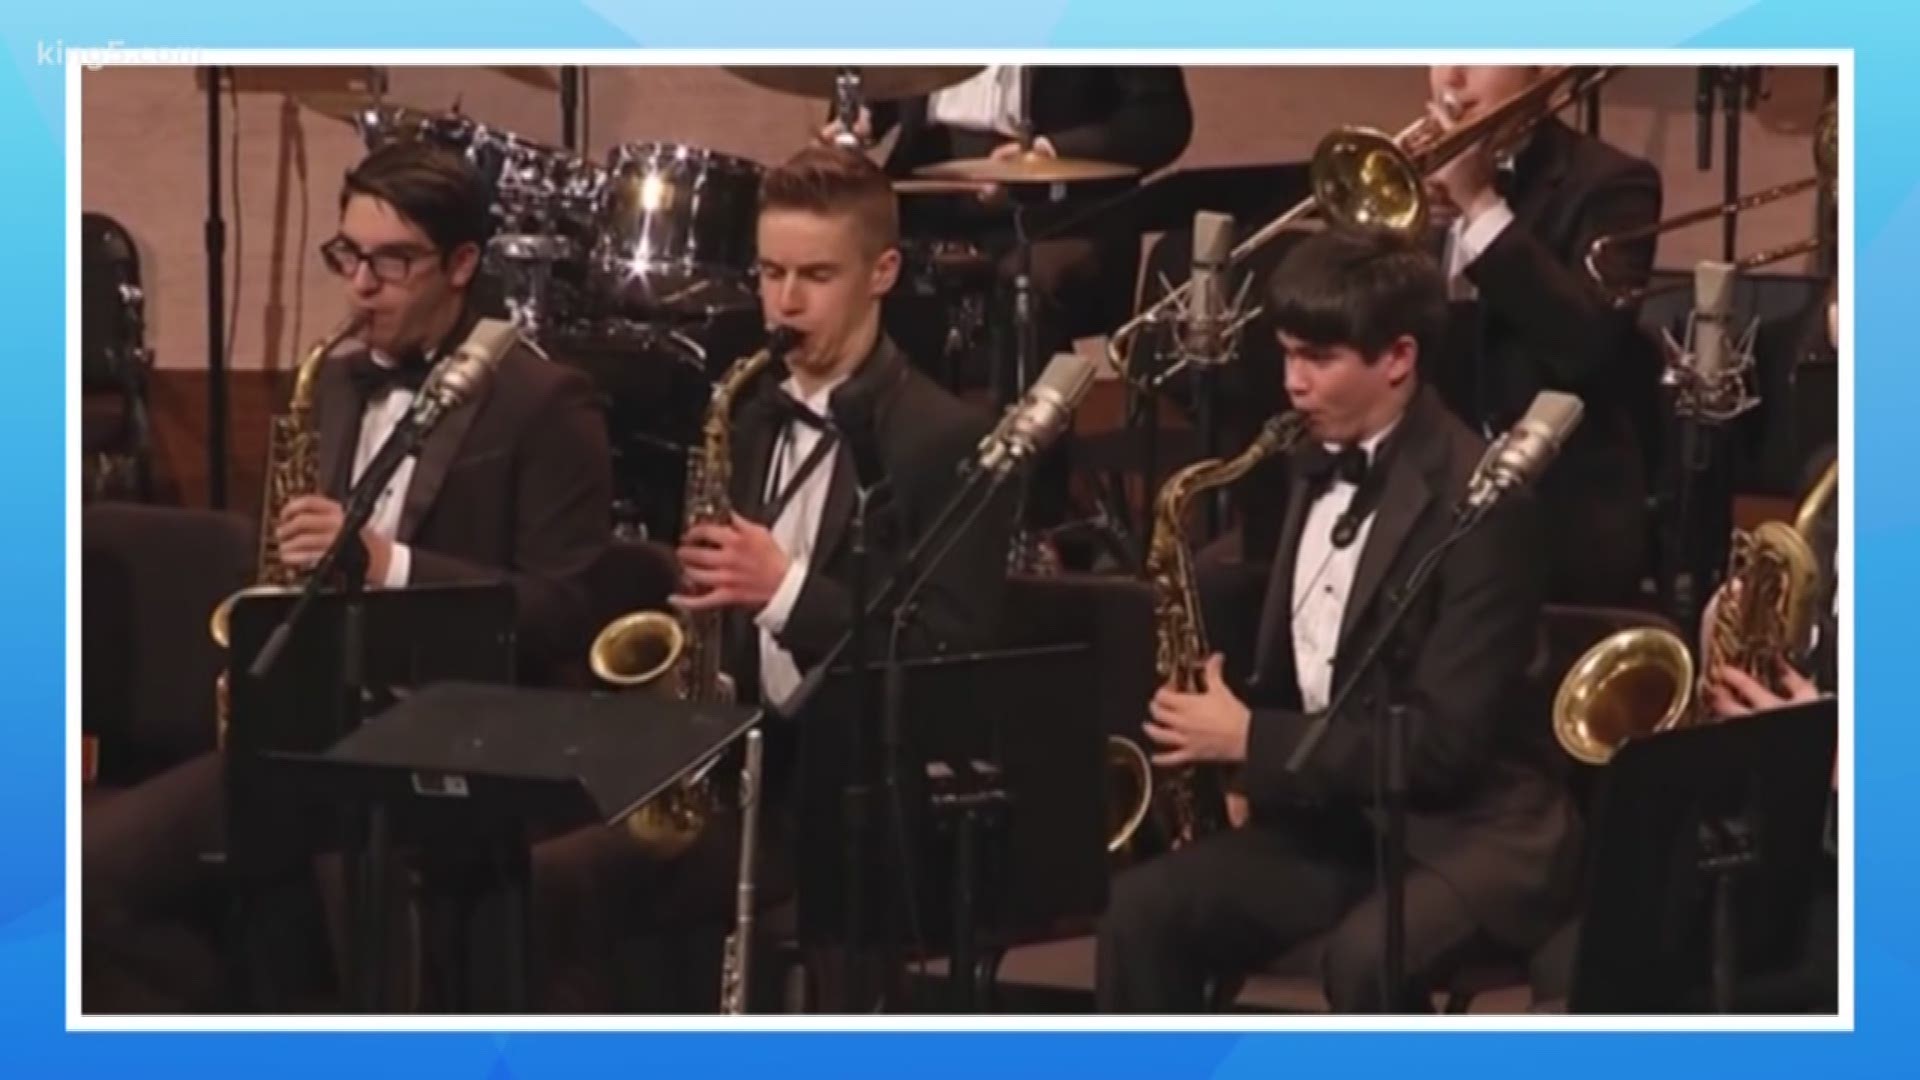 The local high school jazz bands are among the 18 finalists chosen to compete at the Essentially Ellington Jazz Competition in May.